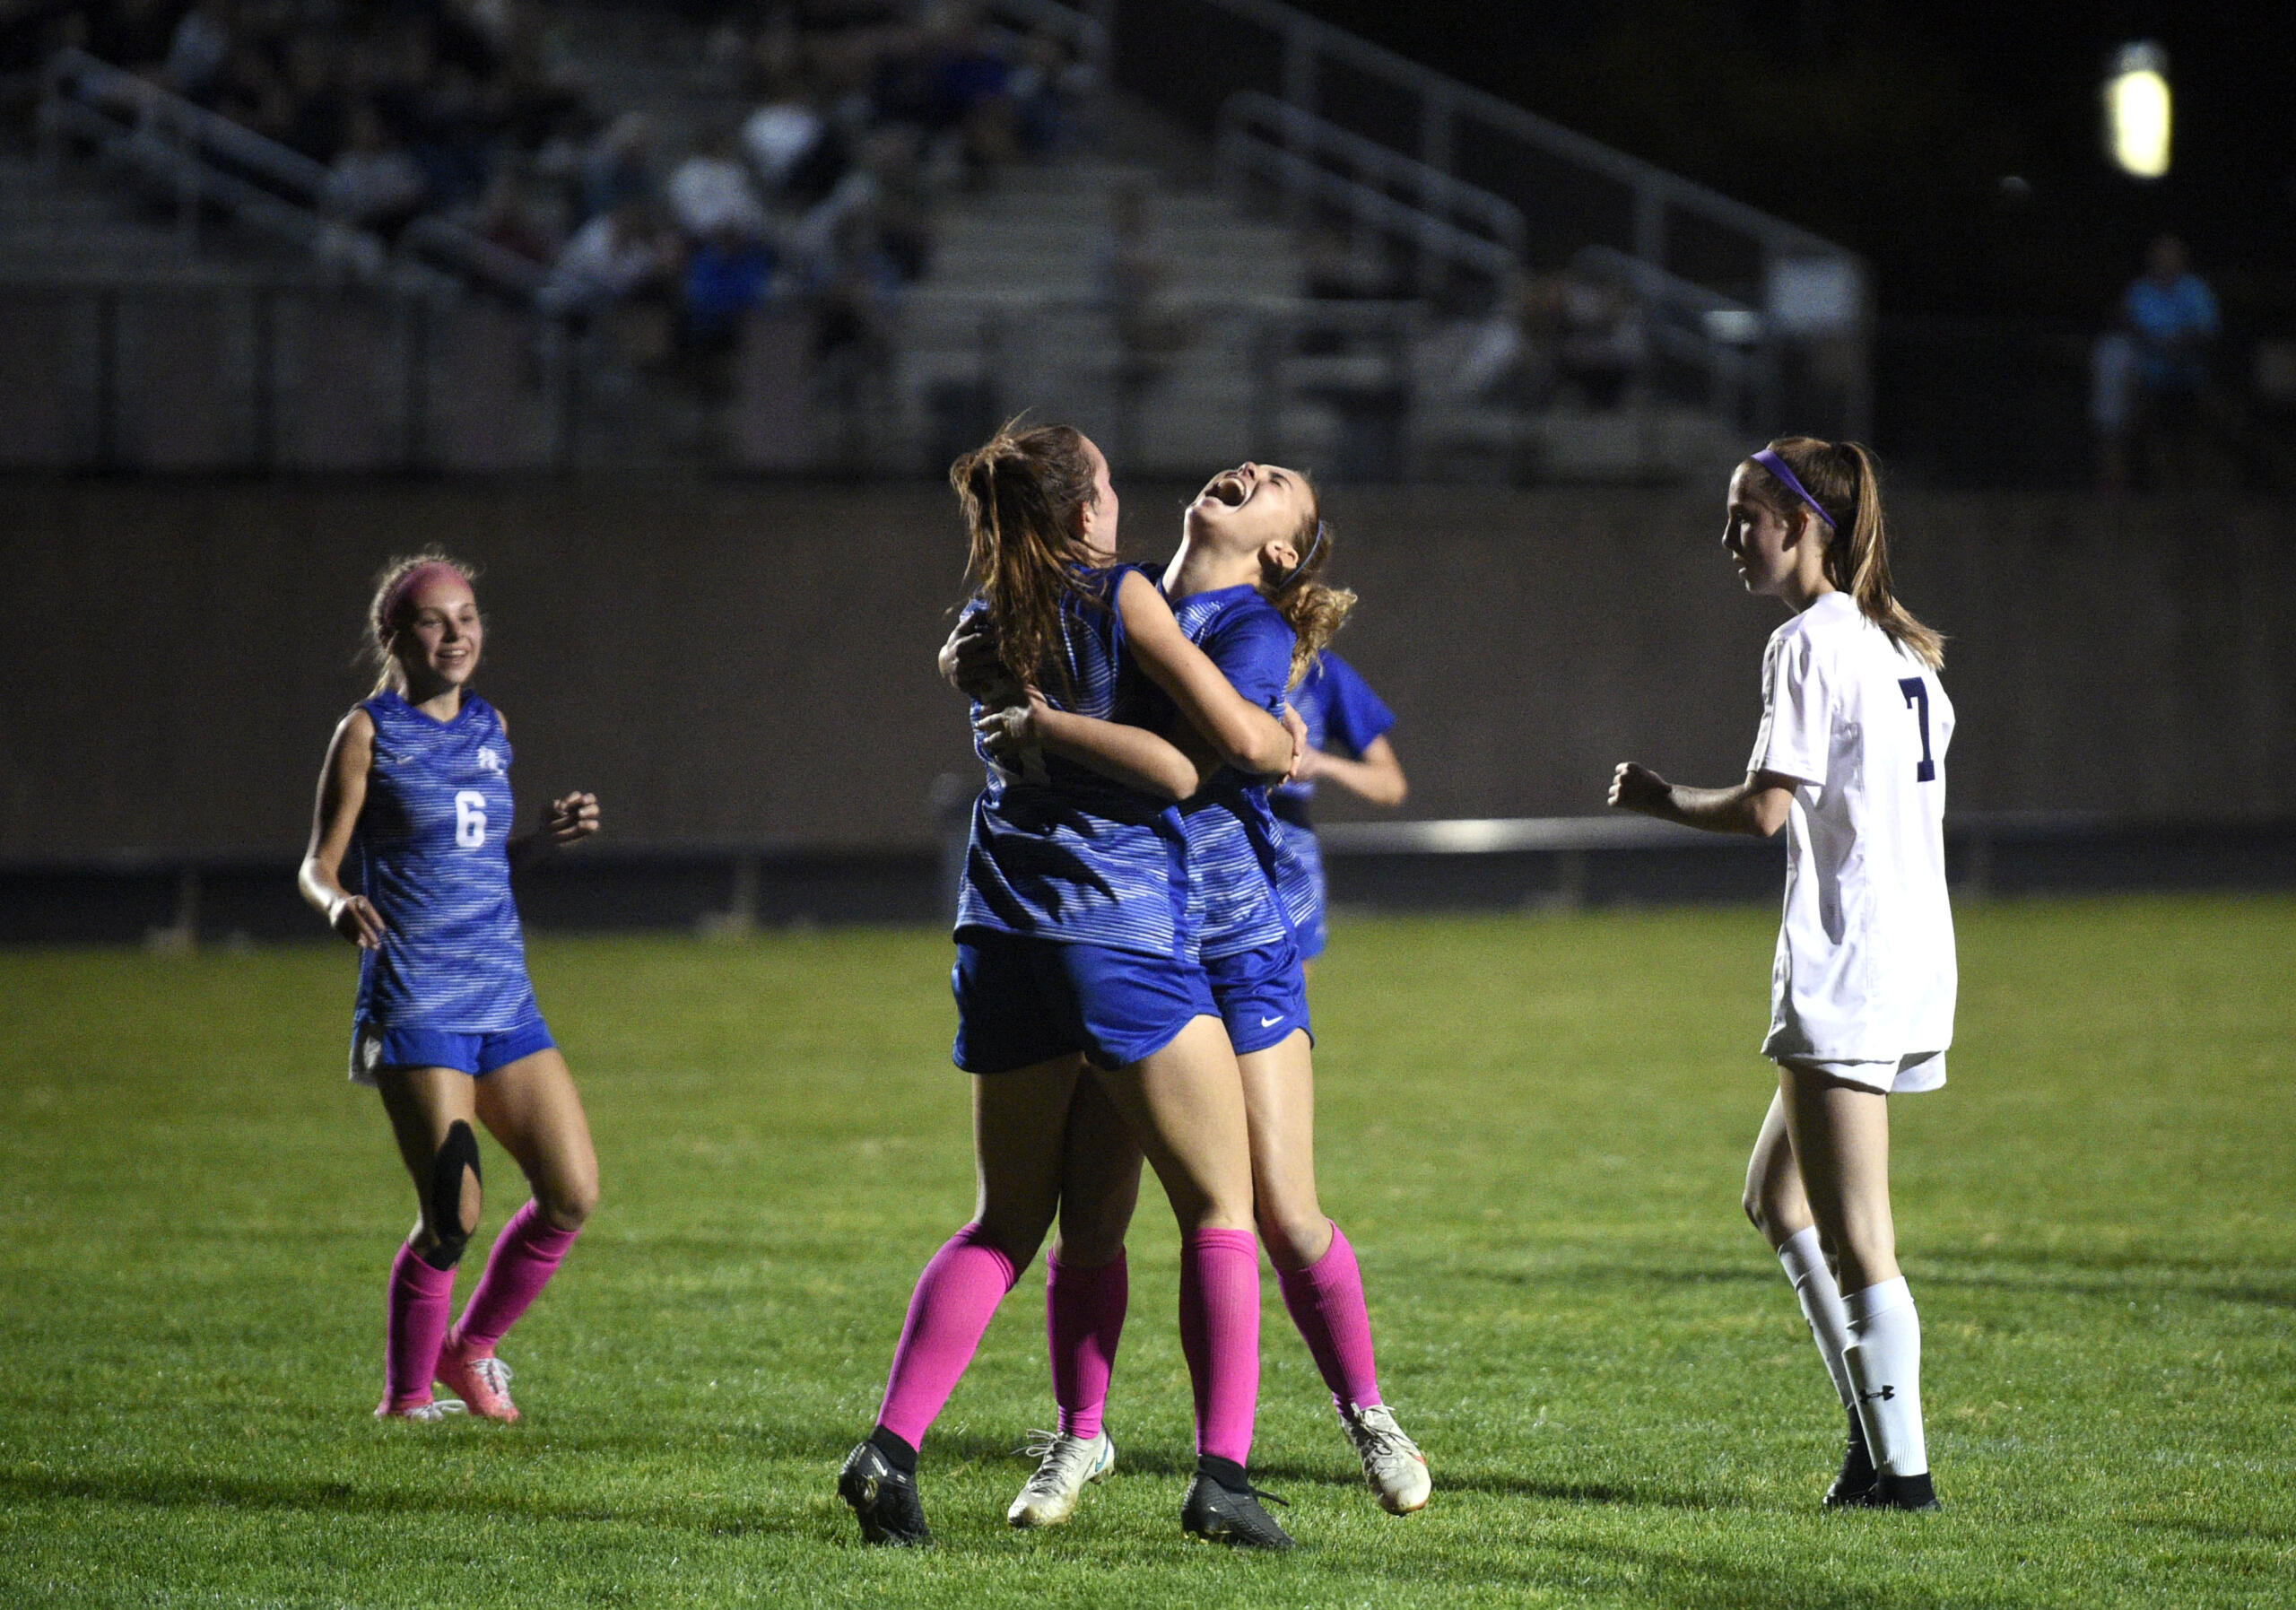 La Center’s Madisen Newbury, right, and Shaela Bradley, left, celebrate after Newbury scored a goal assisted by Bradley during a Trico League girls soccer match against Seton Catholic on Thursday, Oct. 5, 2023, at La Center High School.